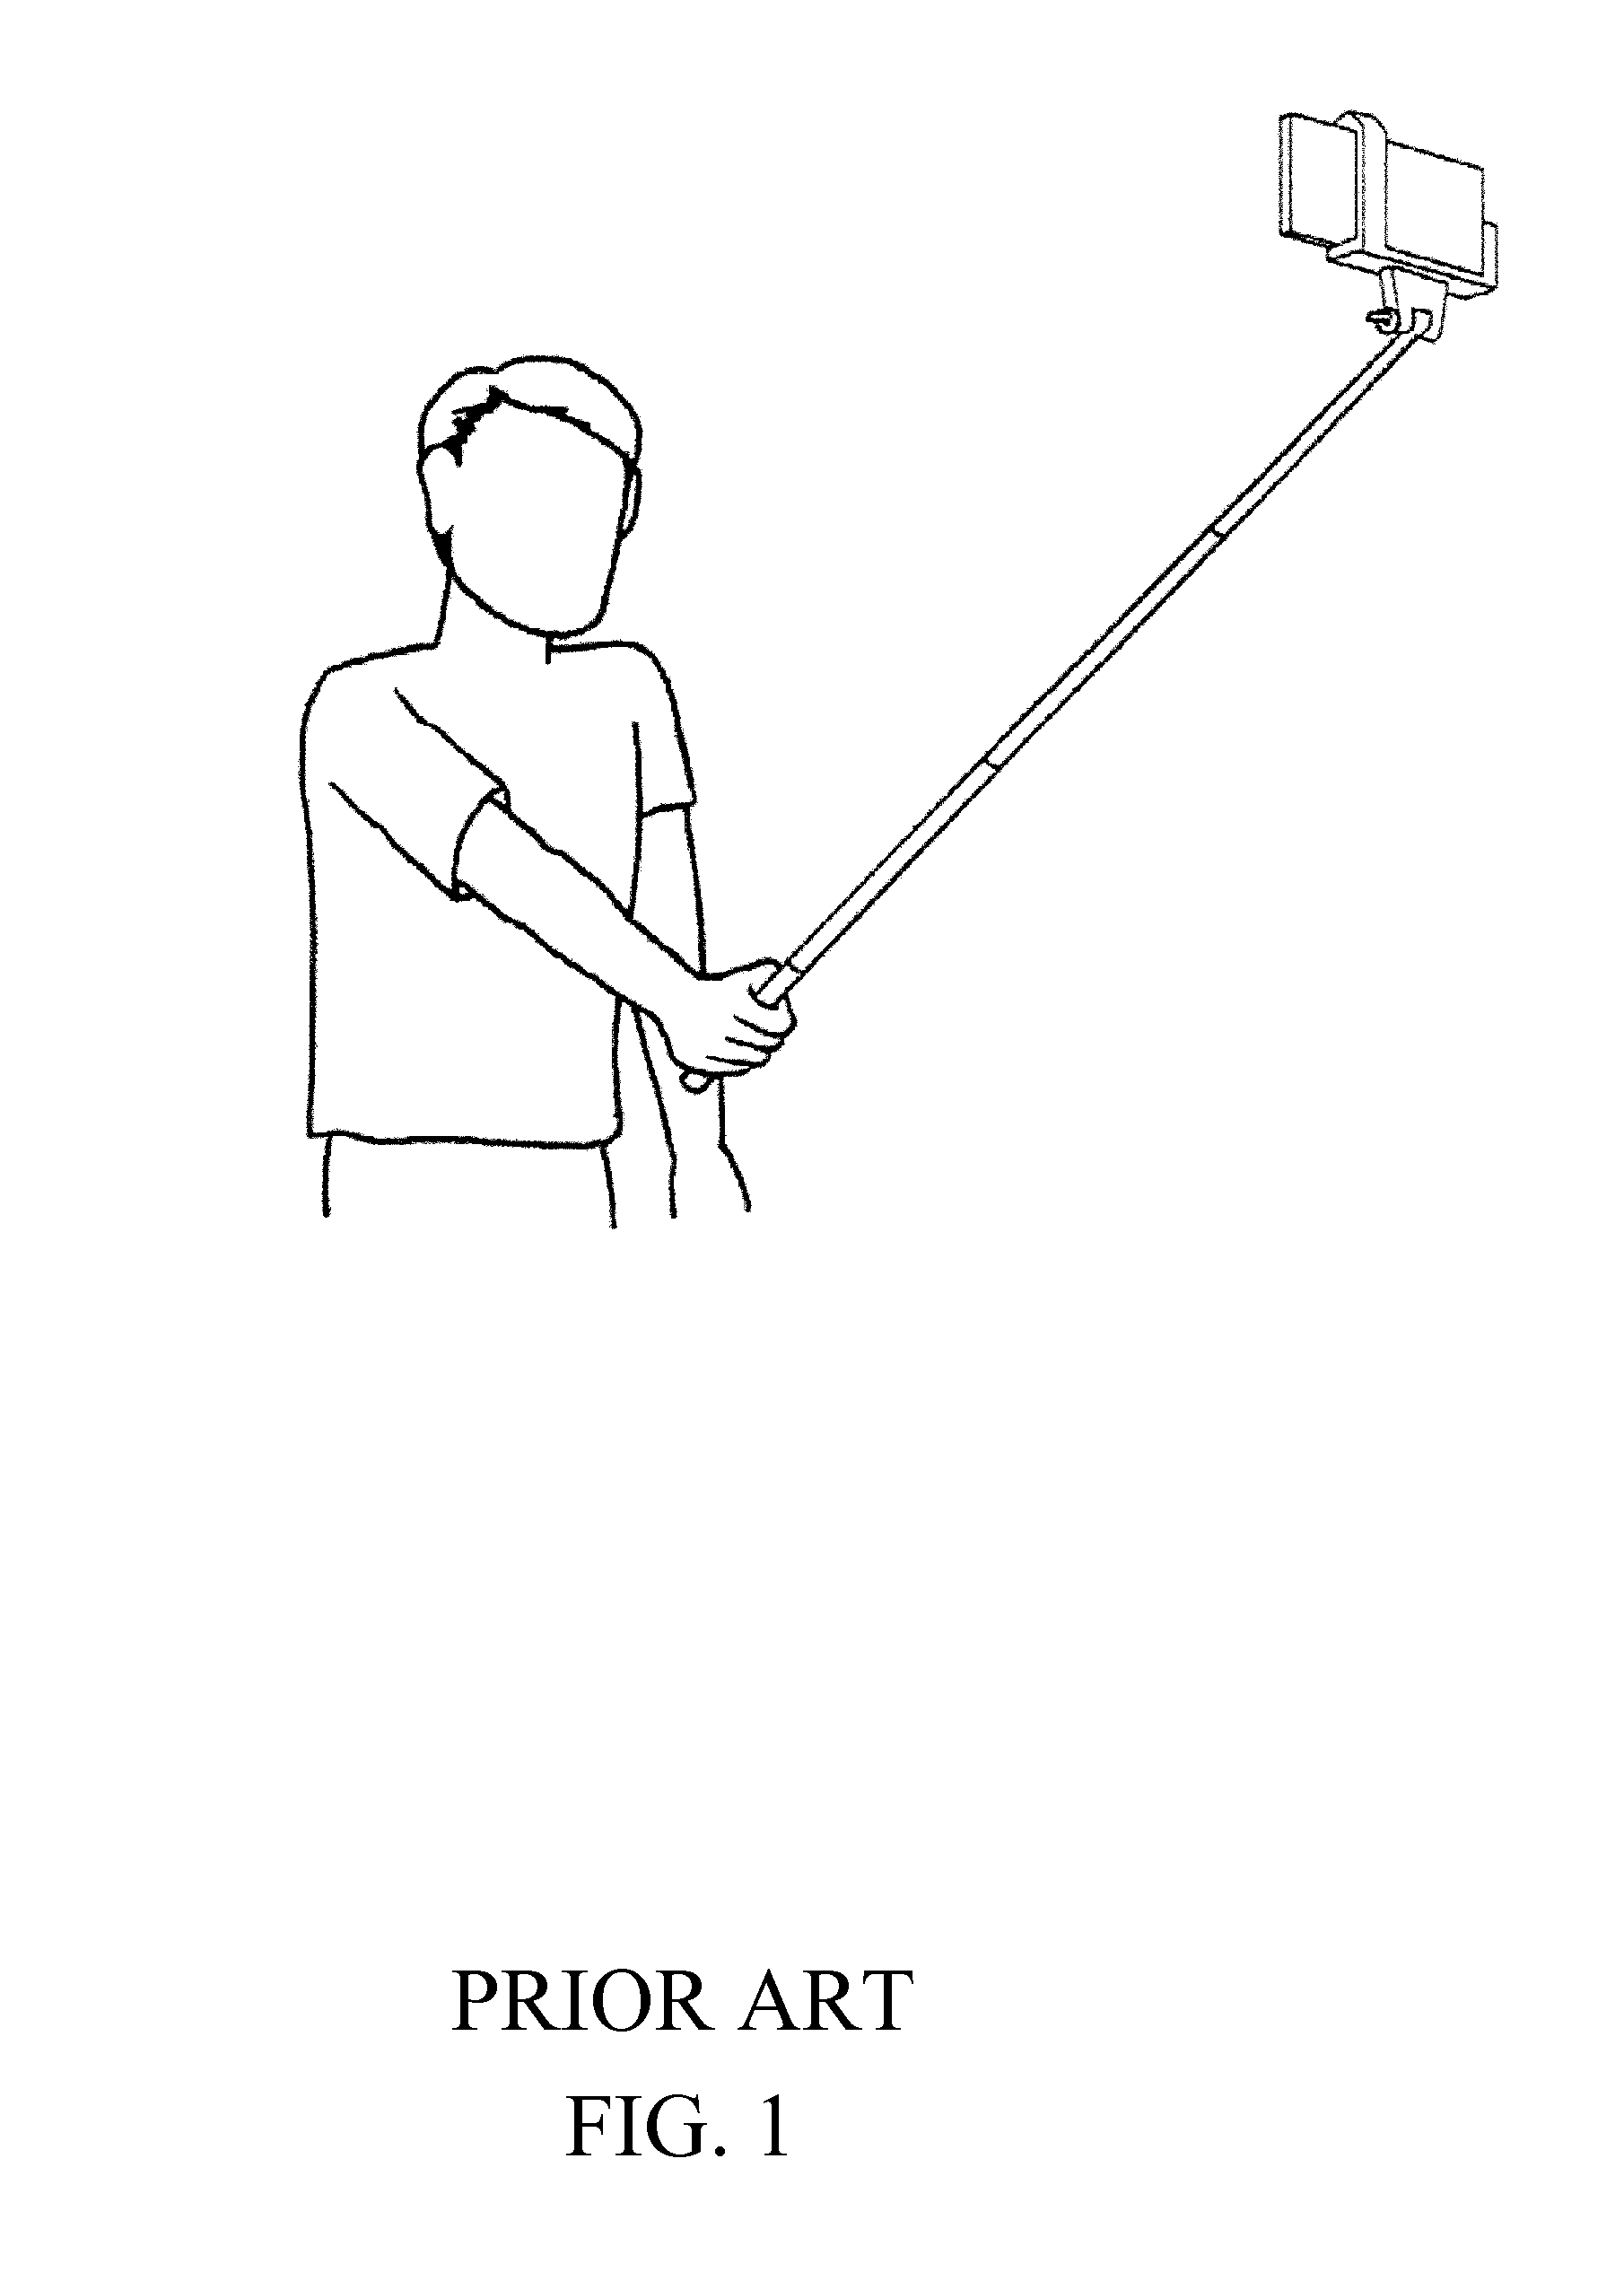 Cellular Phone With Built-In Selfie Stick